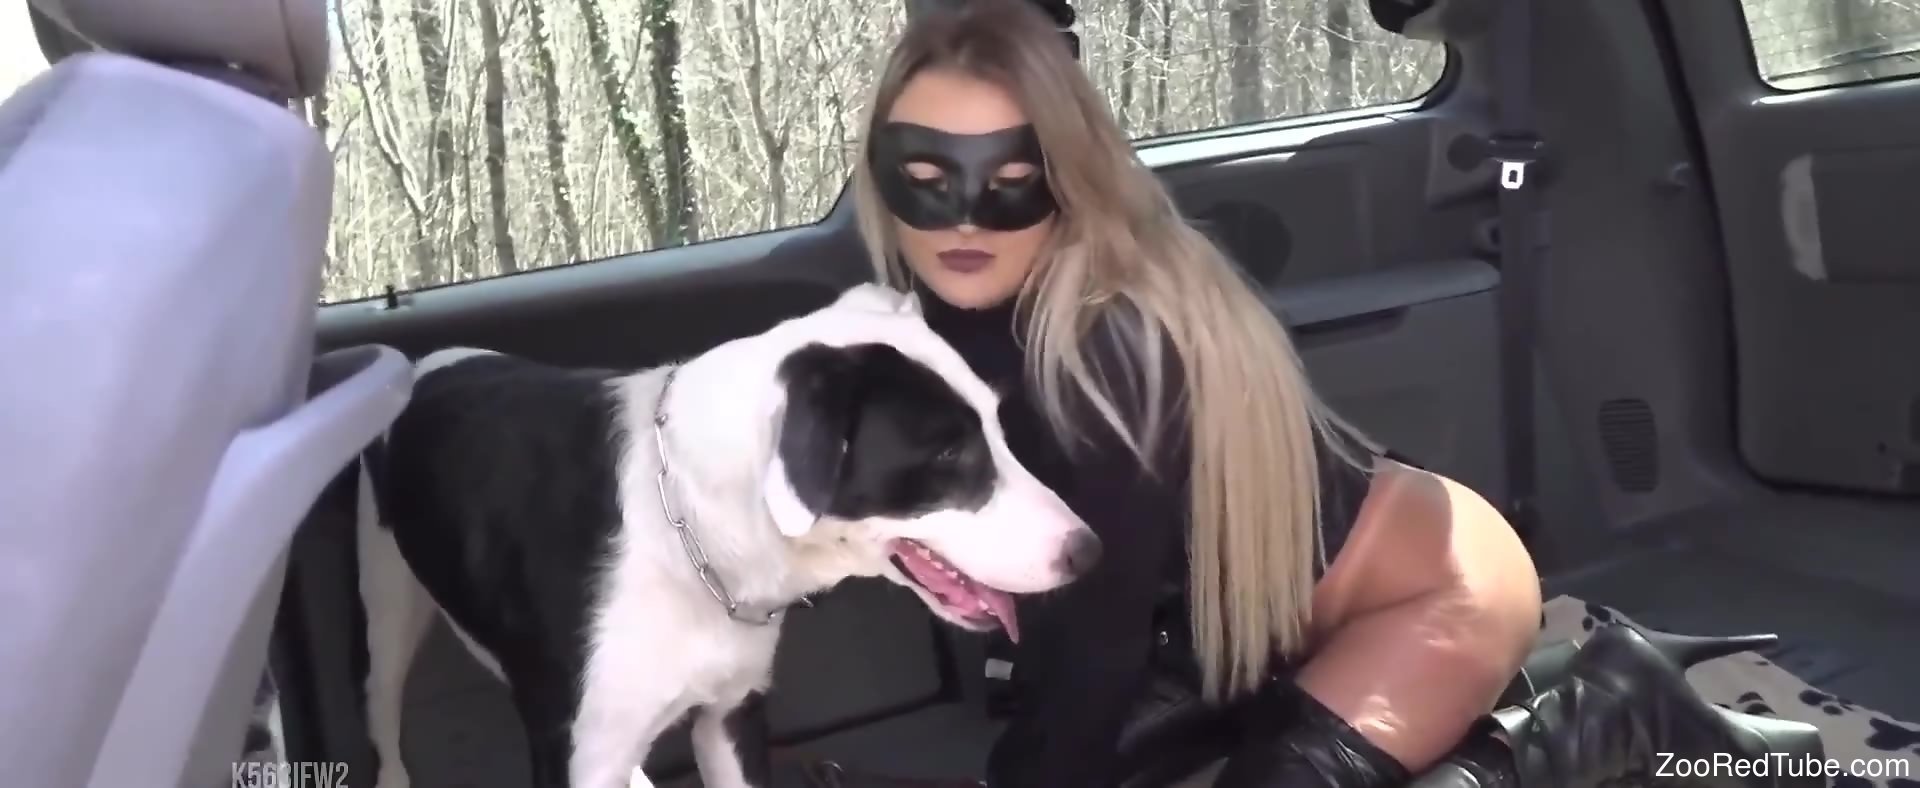 Dog And Girl Ki Chudai - Fine woman with sexy ass, doggy porn with a real dog in the car